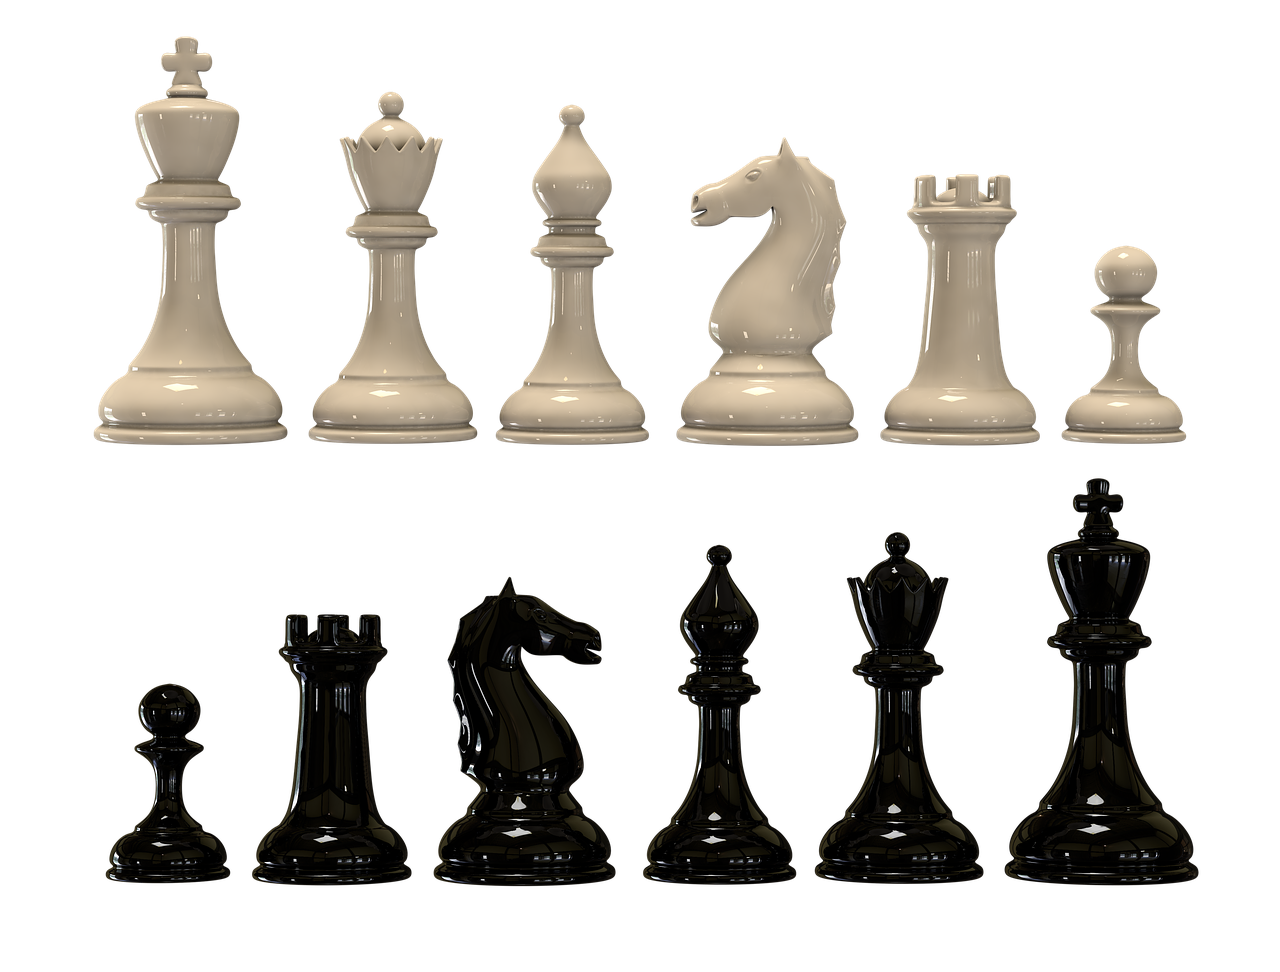 chess pieces lined up in a row alternating black and white and types of pieces - optimize talent "where do they go"